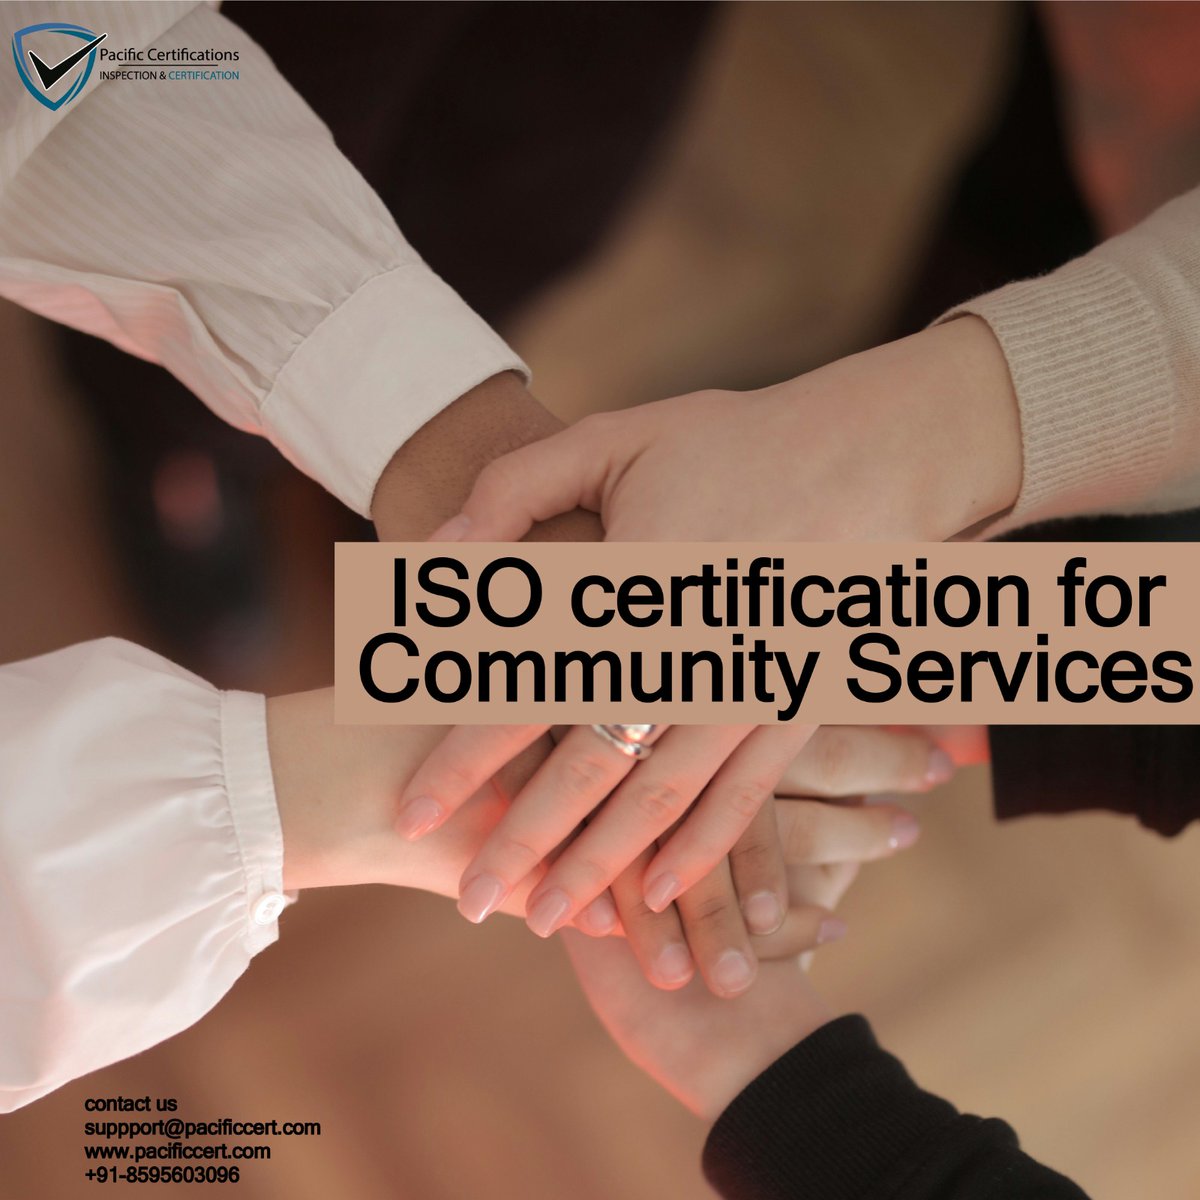 Empowering Communities: Understanding ISO Certification for Community Services 🌍 Learn how ISO certification can elevate community service organizations and drive positive impact!
Read More at: rb.gy/ccanto
#ISOcertification #CommunityServices #PacificCertifications